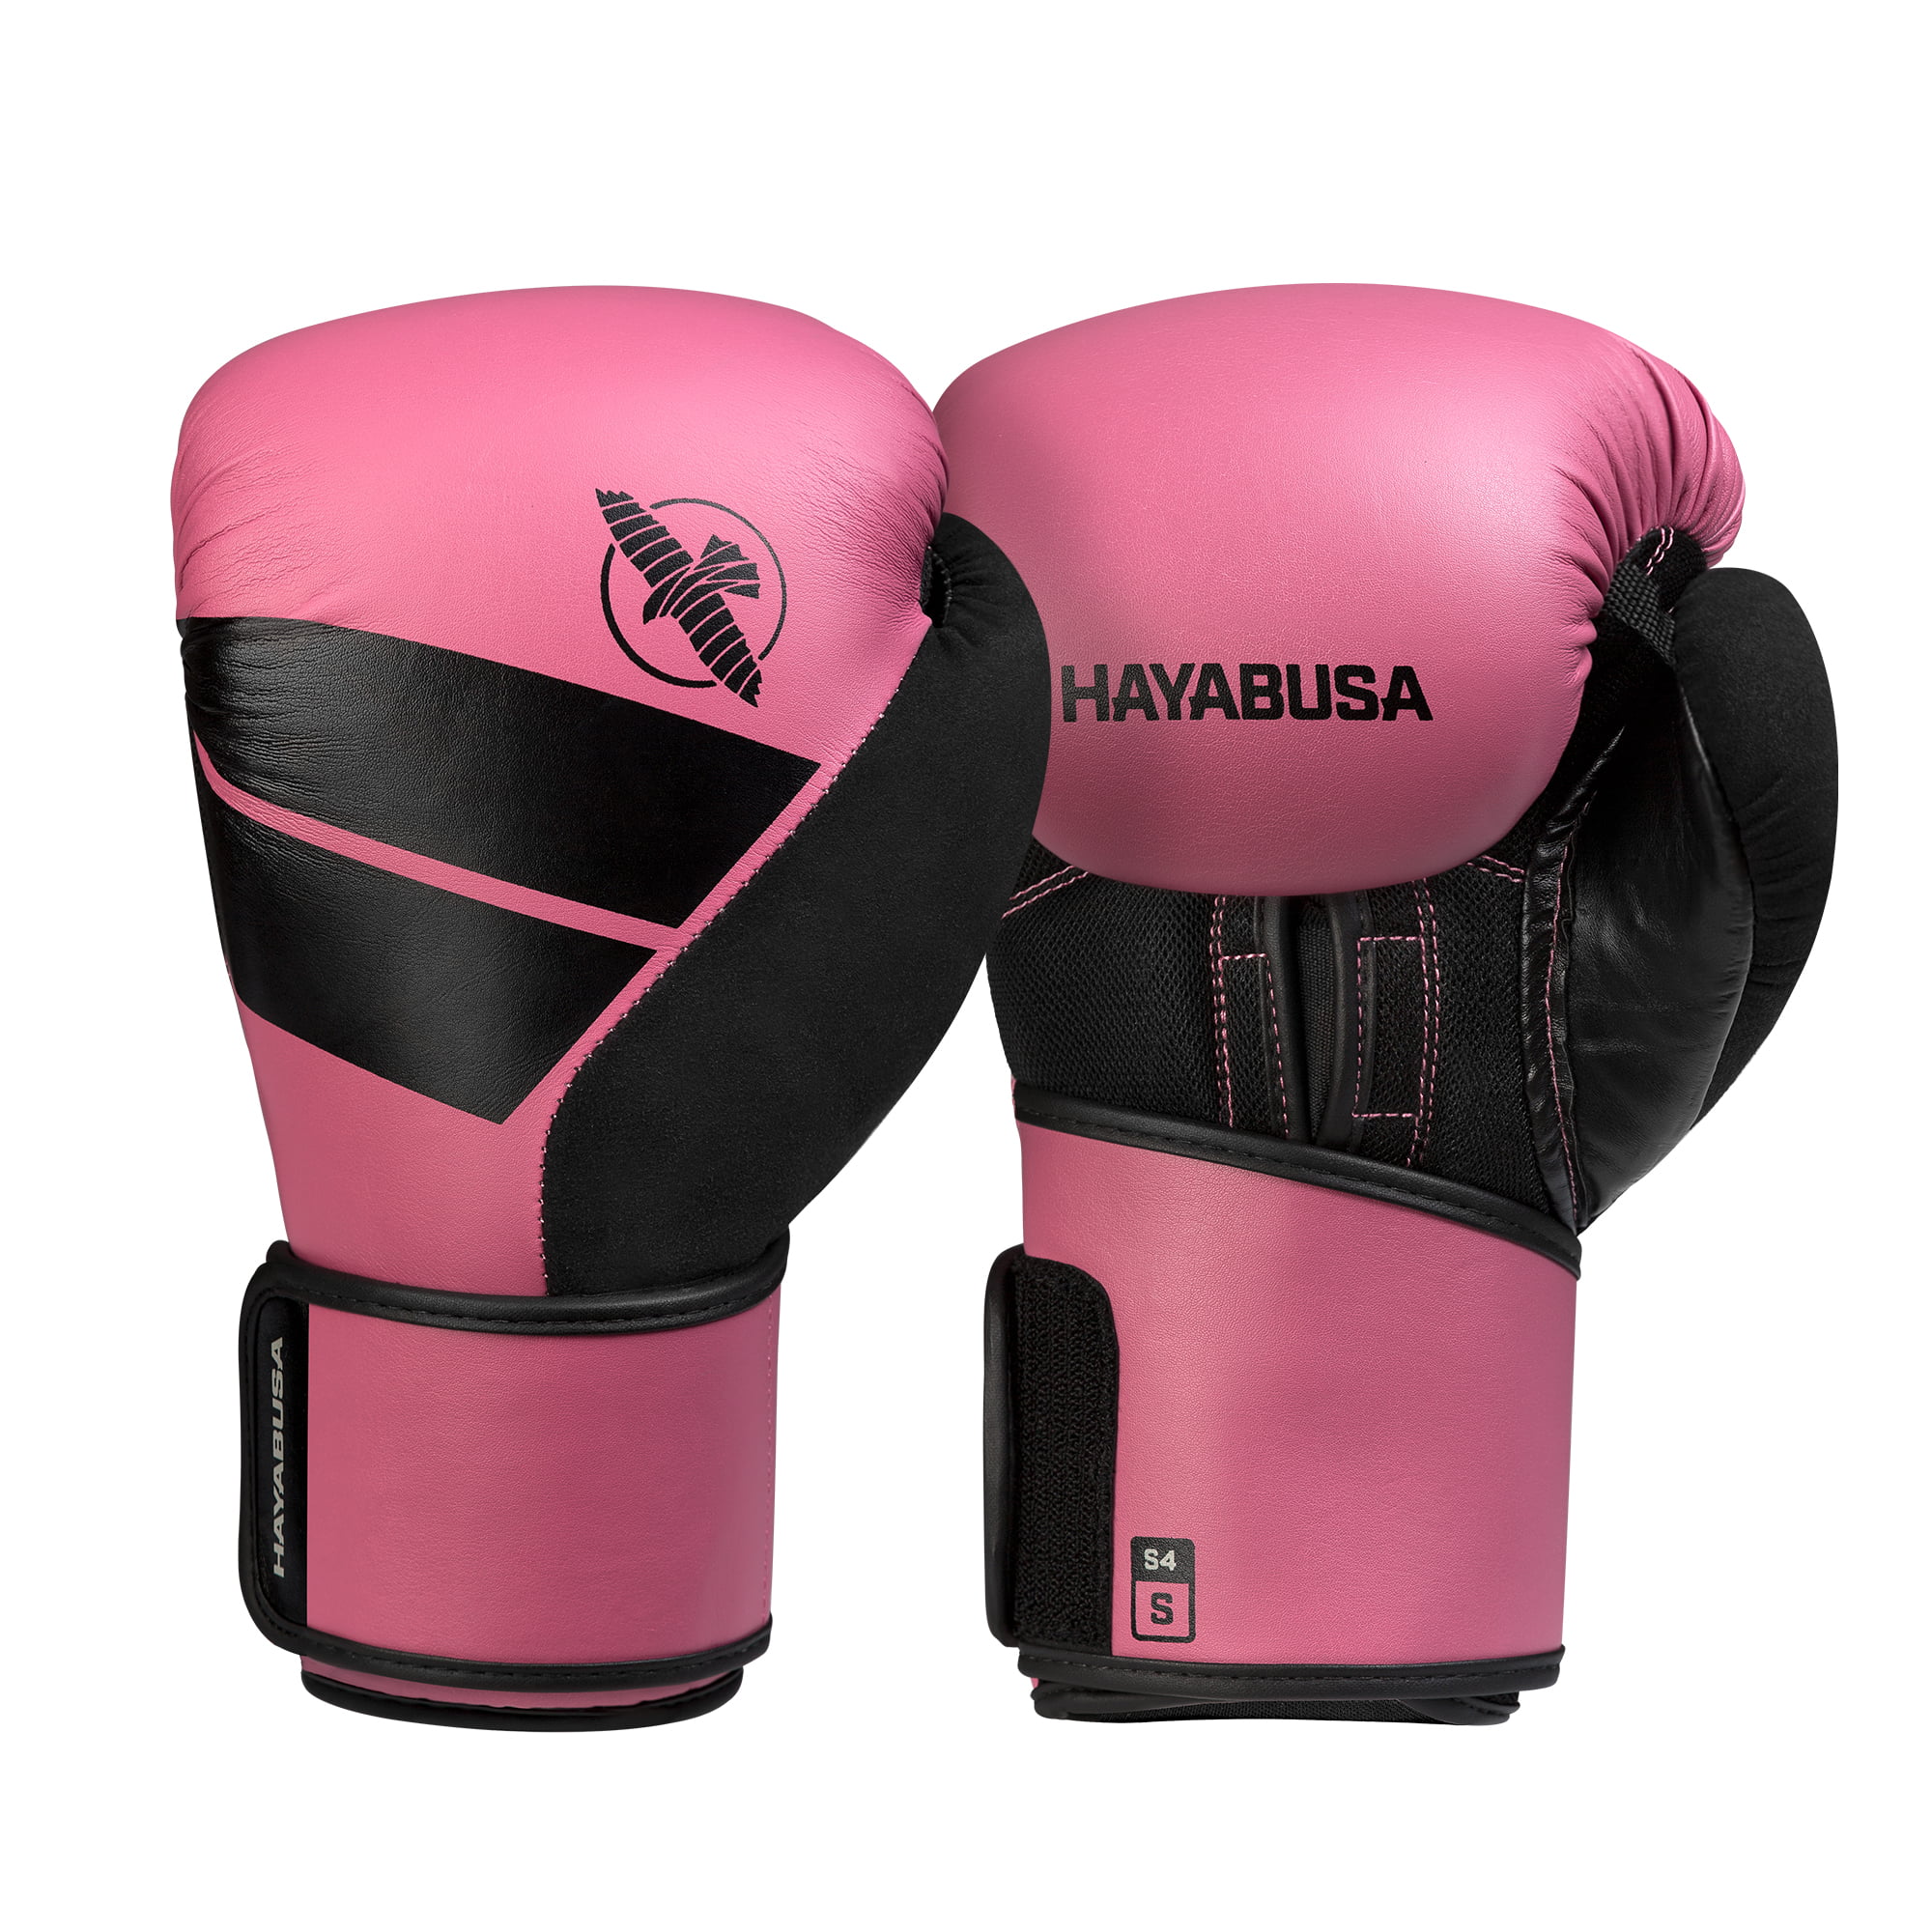 Hayabusa Pro Horse Hair Lace Up Boxing Gloves for Men and Women 